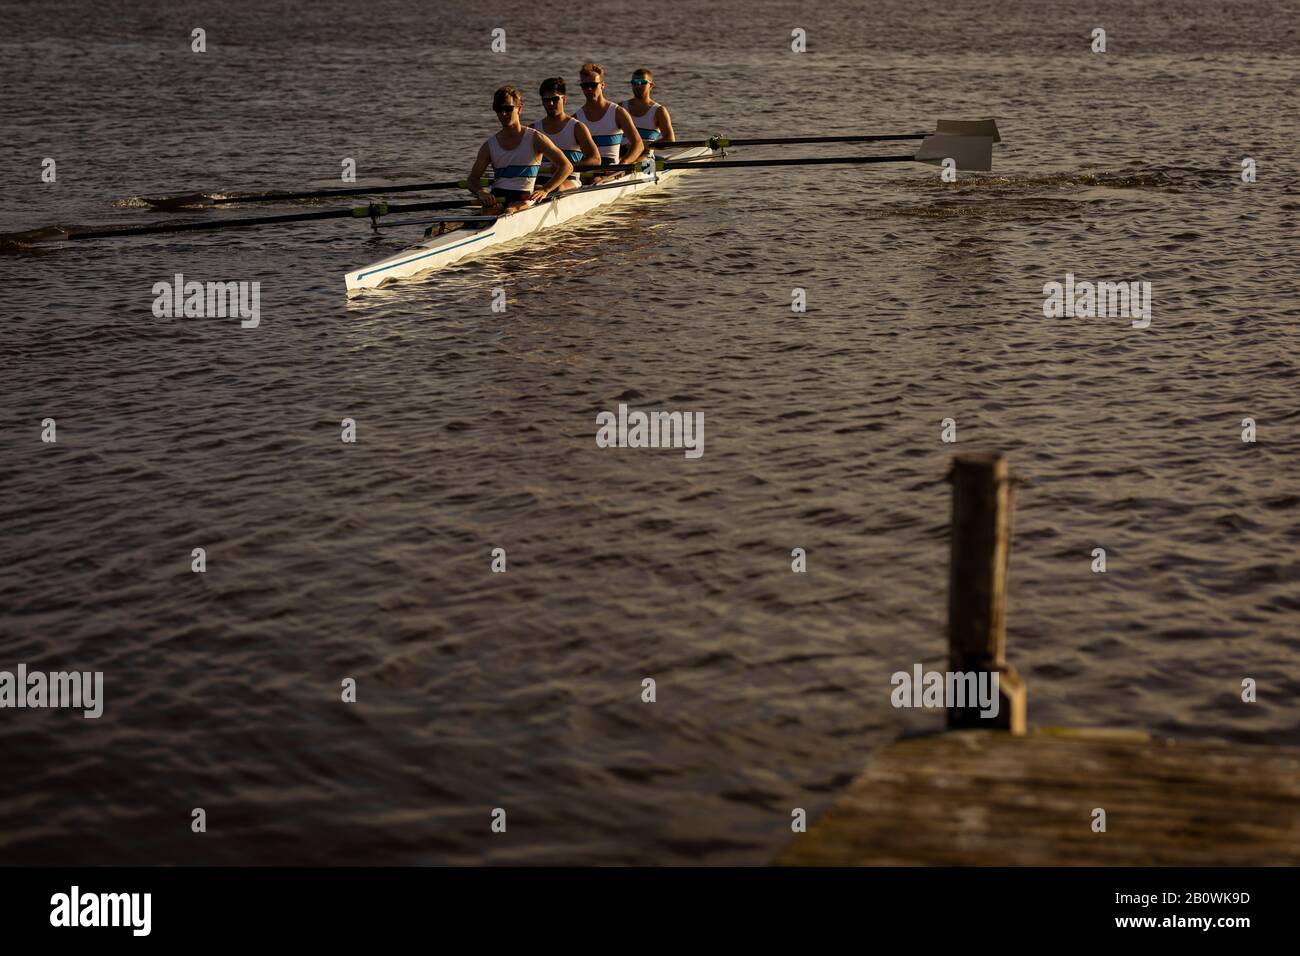 Teammates rowing on the water Stock Photo